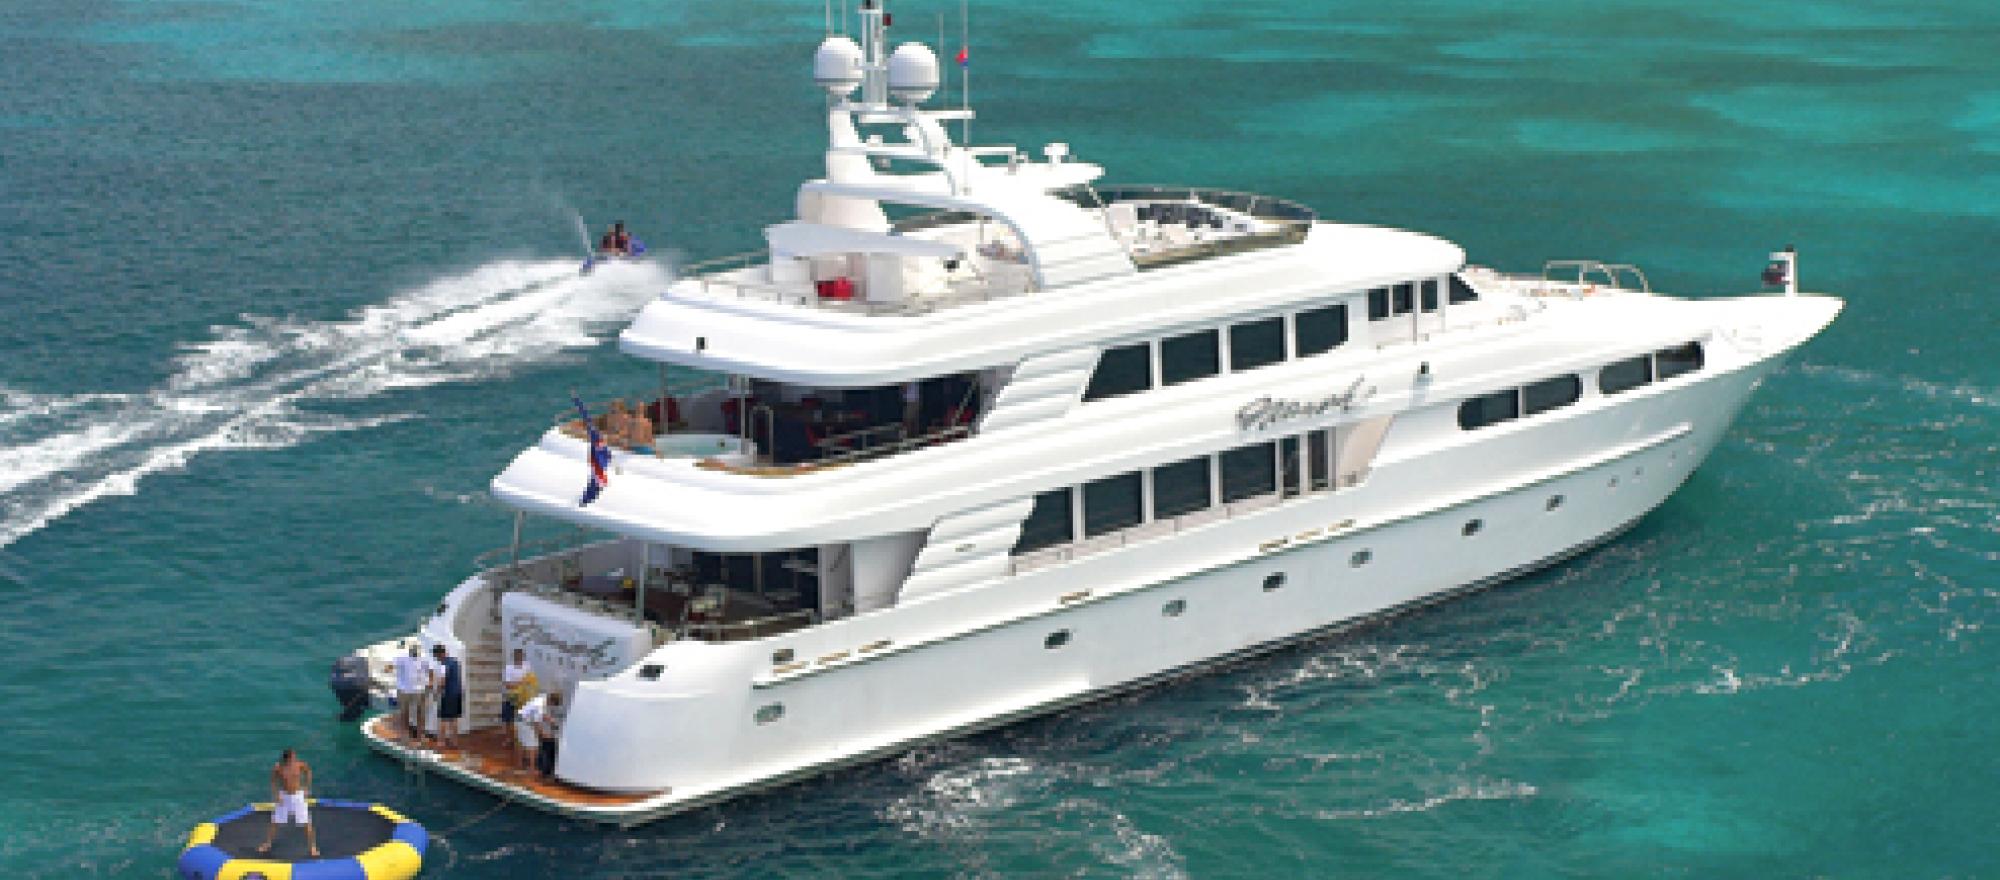 Arguably one of the best charter yachts in the world is Excellence III, a 187